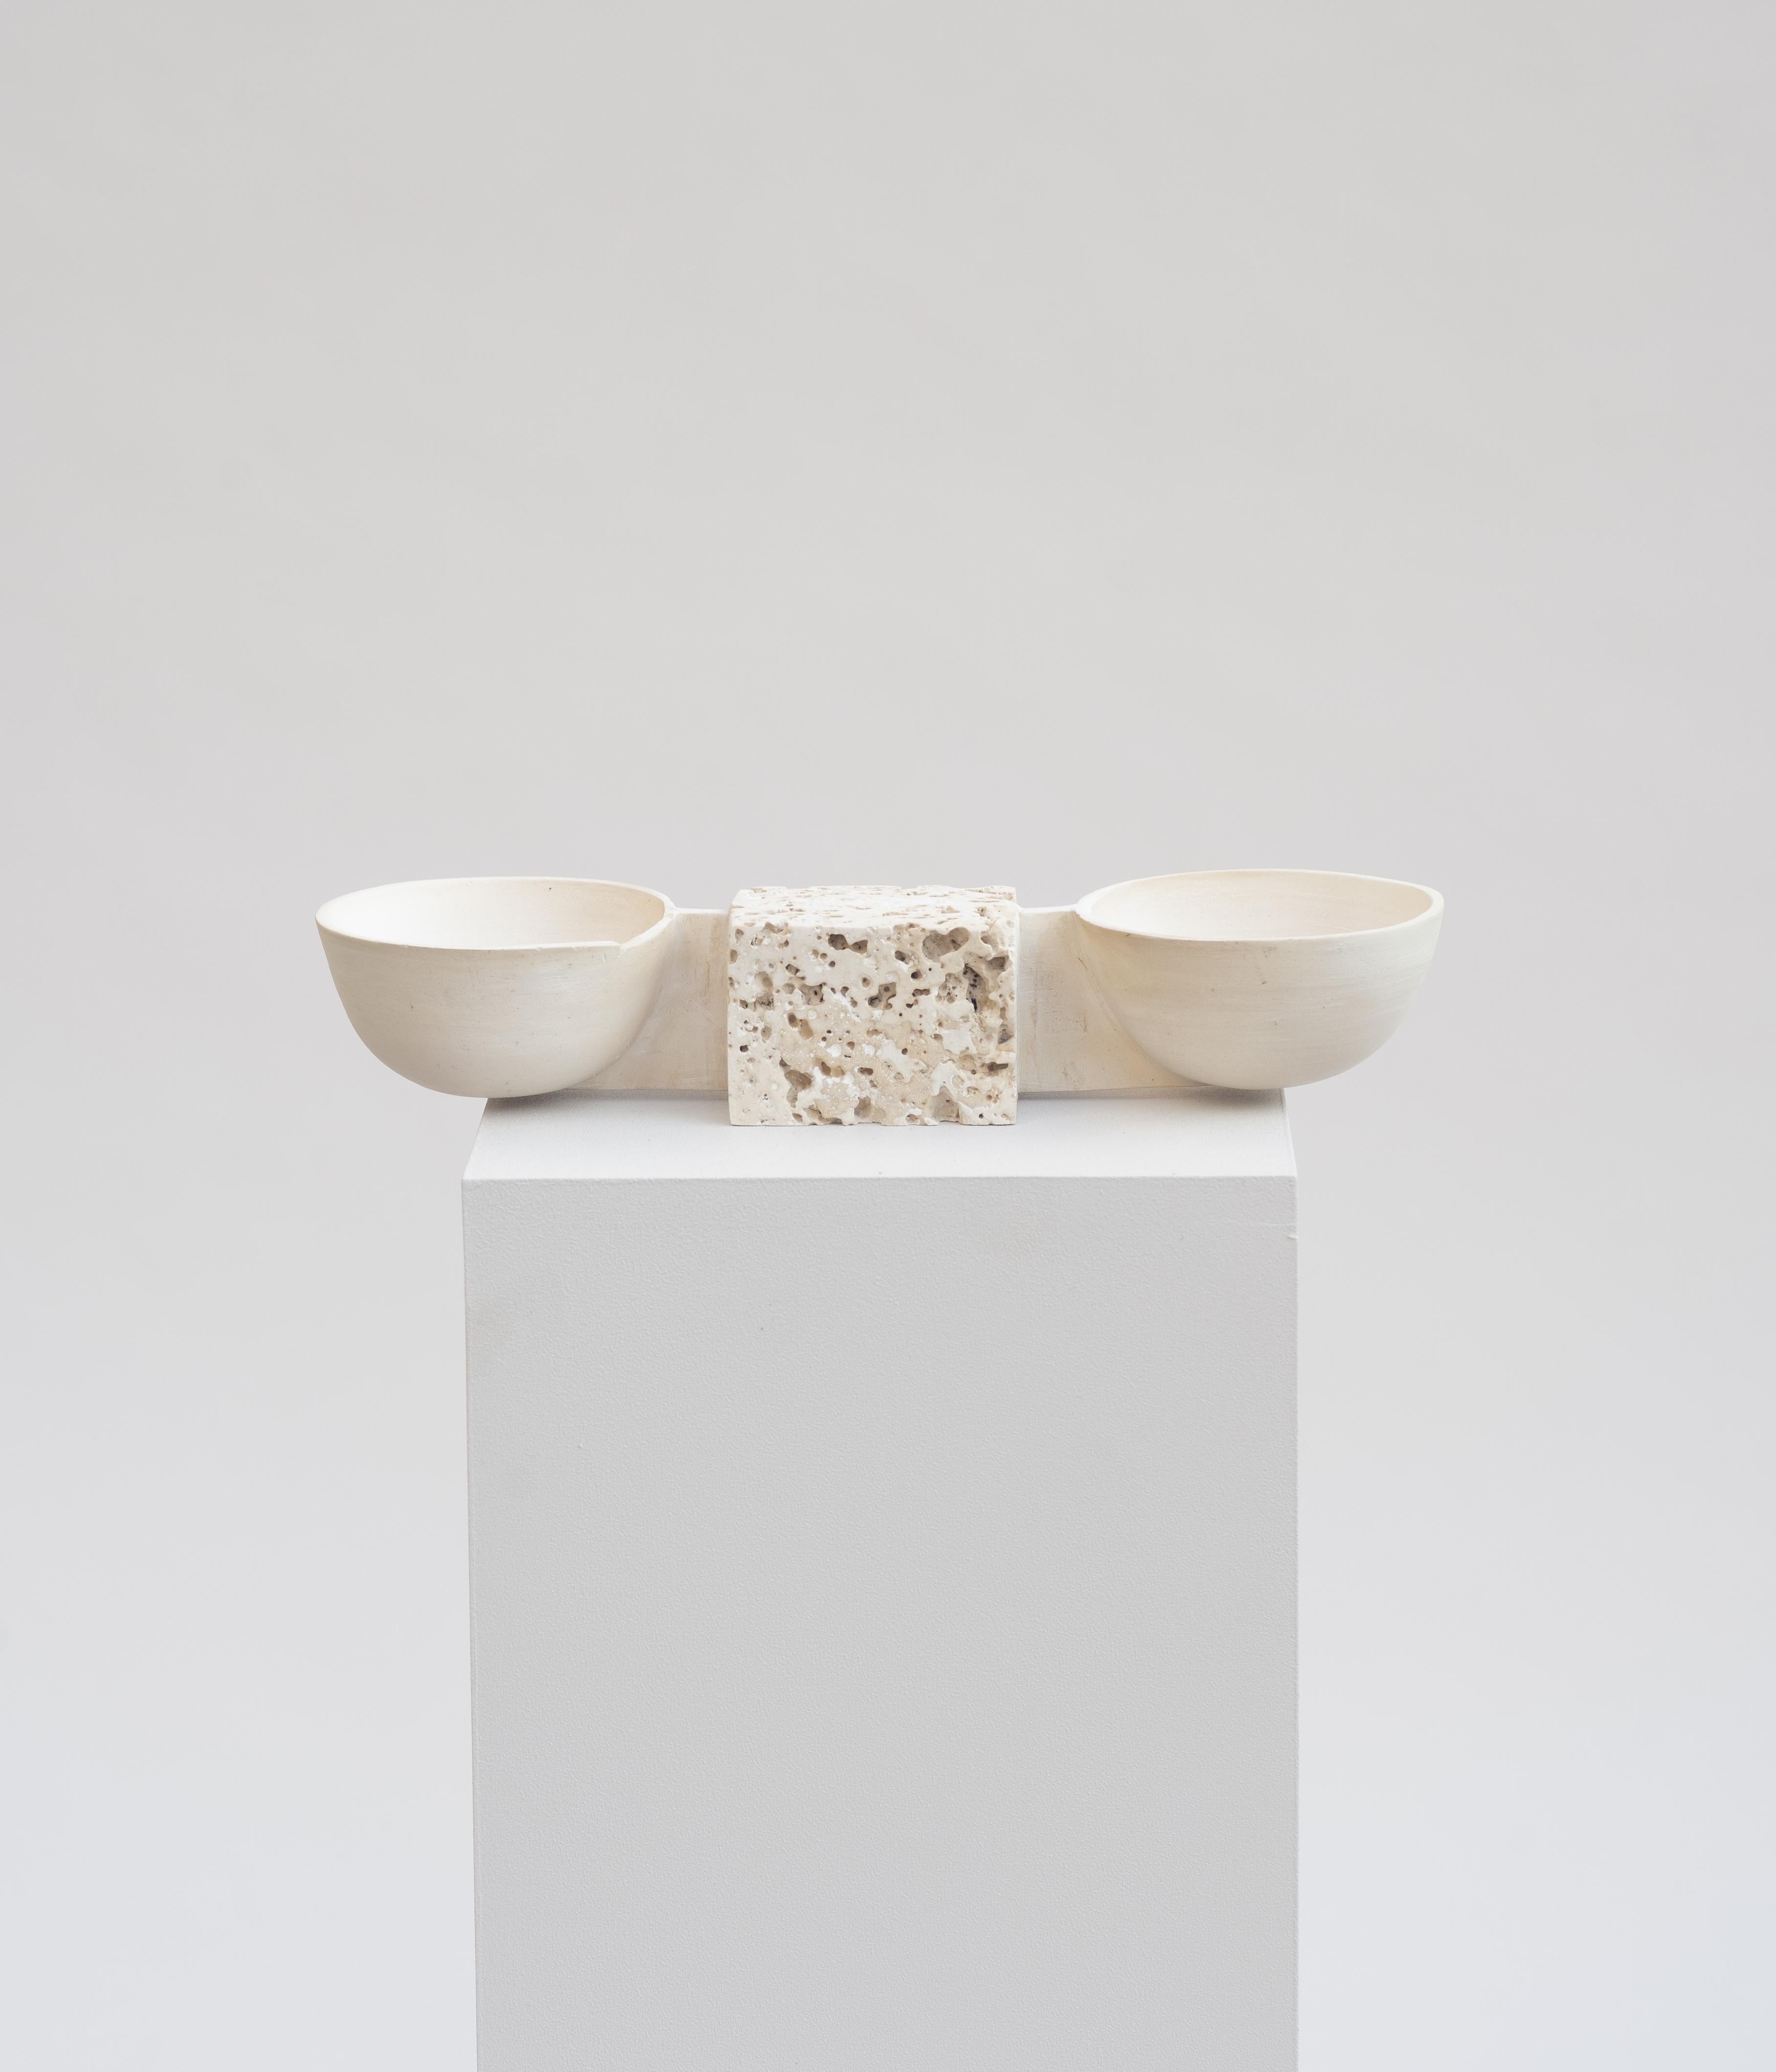 Double bowl by Turbina.
Future Archeology.
Dimensions: H 4.5 x W 24 x D 8 cm.
 Bowl Diameter 8 cm.
Materials: Natural / White Mayolica Fired Clay, Stone Cast.

Future Archeology: The Object as connection and symbol to understand past and future